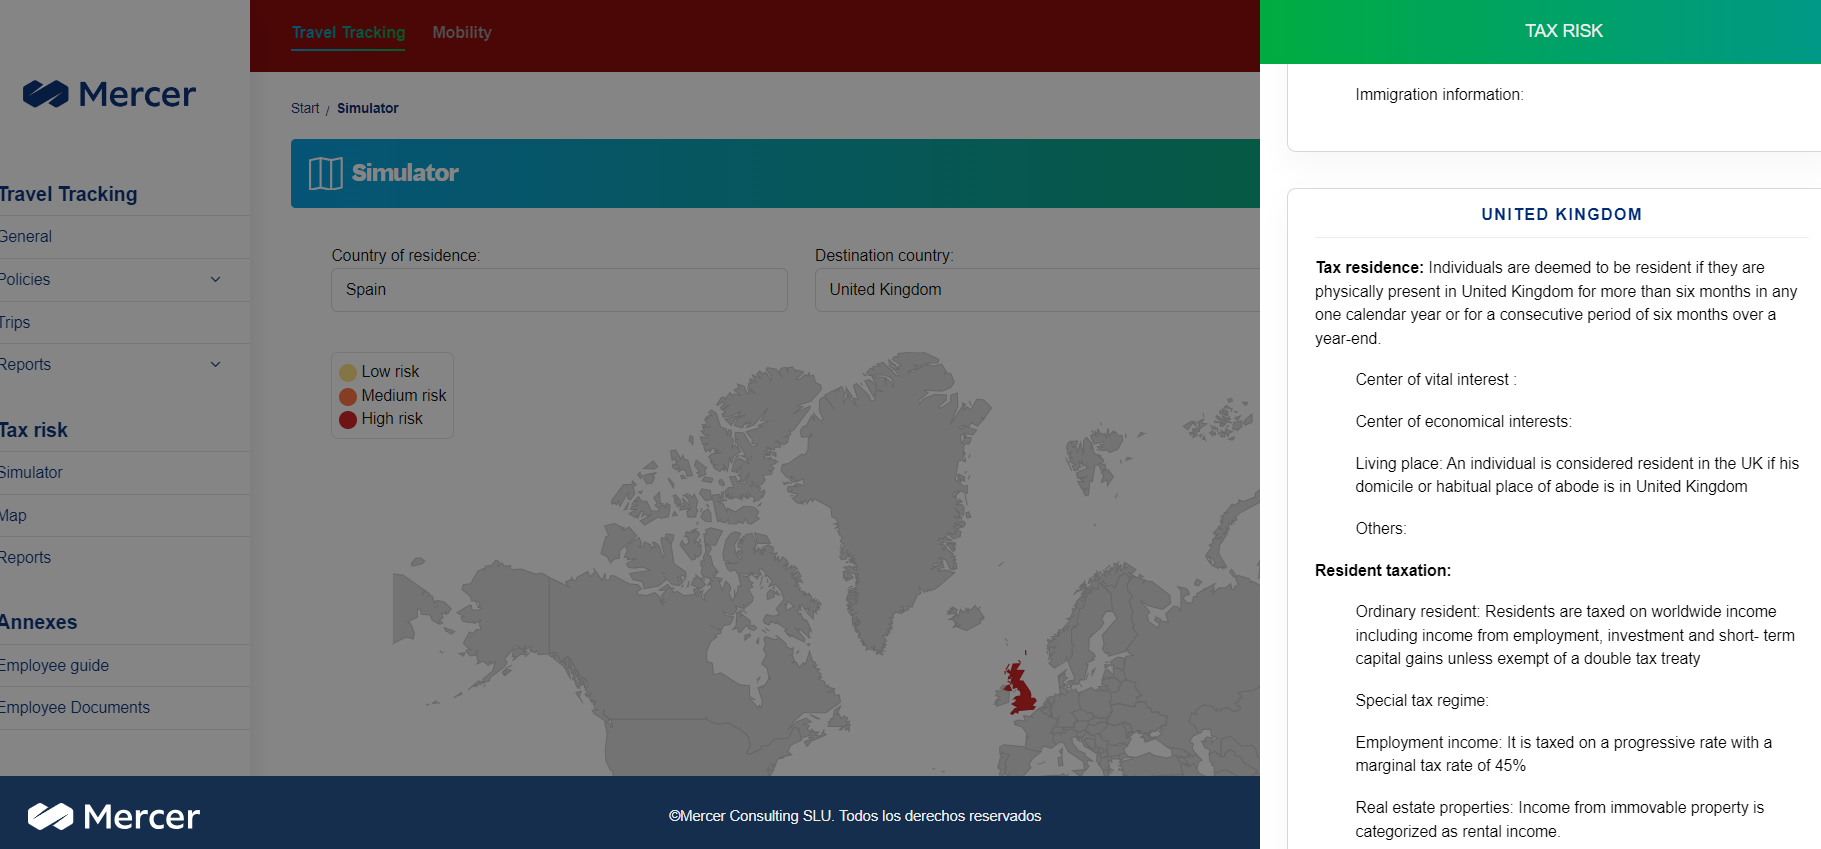 Screenshot of a sample Tax Risk Map for an overseas worker, from the Mercer Travel Tracker application.